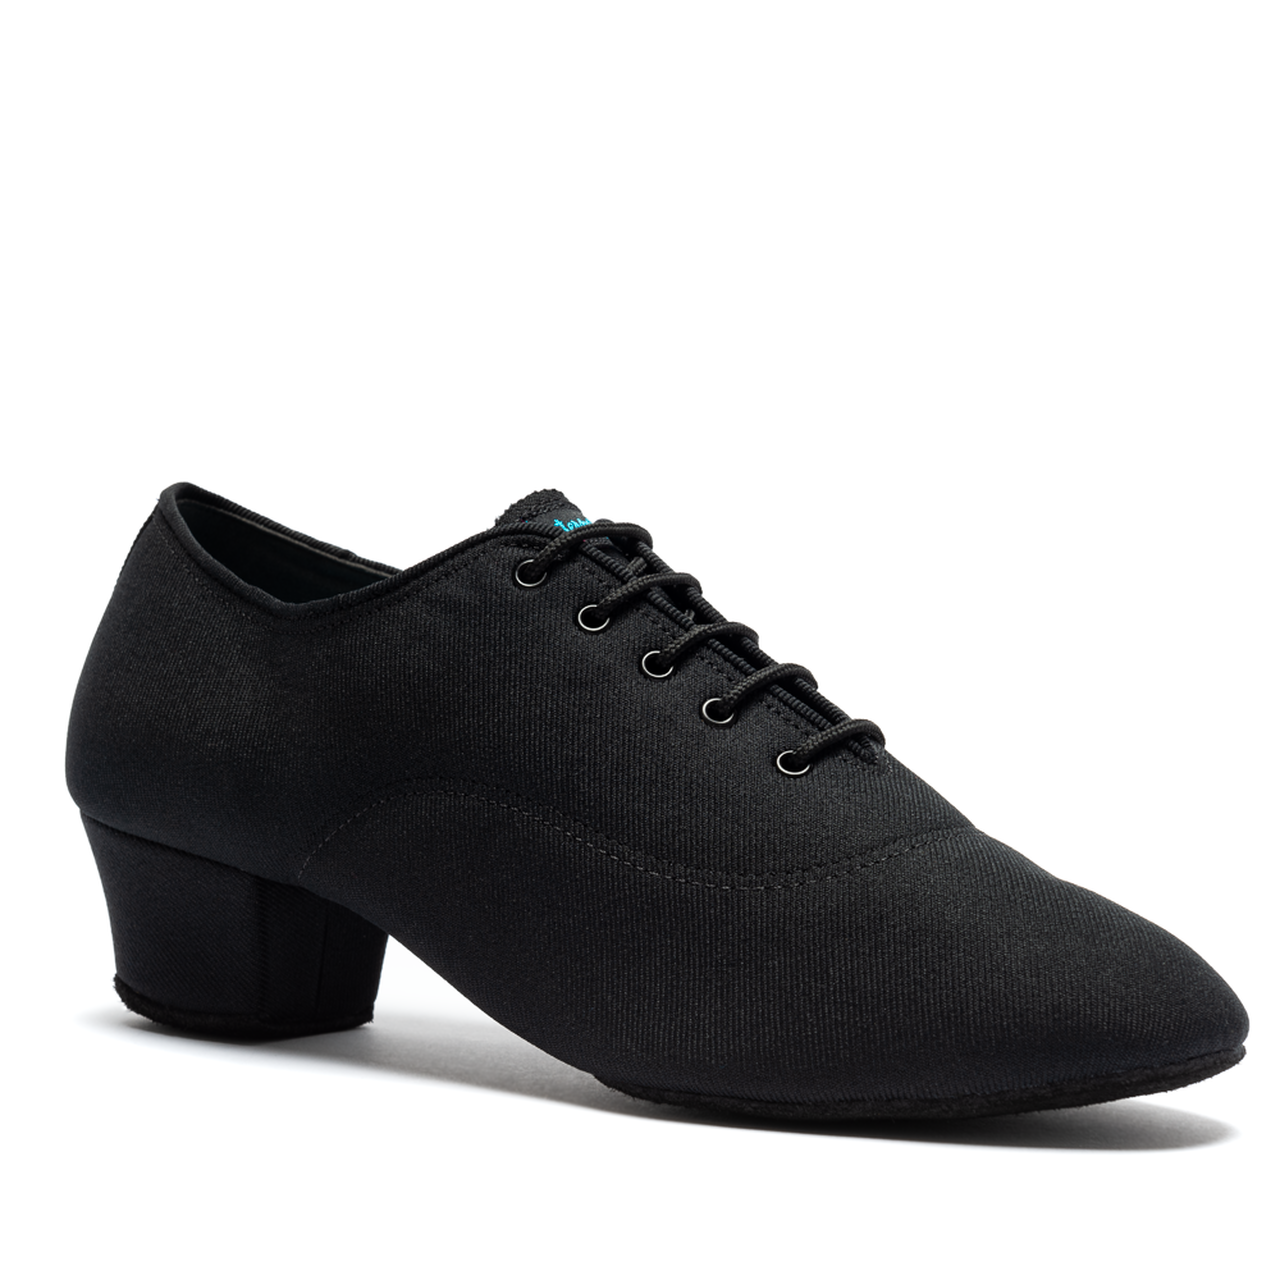 International Dance Shoes IDS Rumba Men's Latin Shoe Available in Black Calf or Lycra in Stock